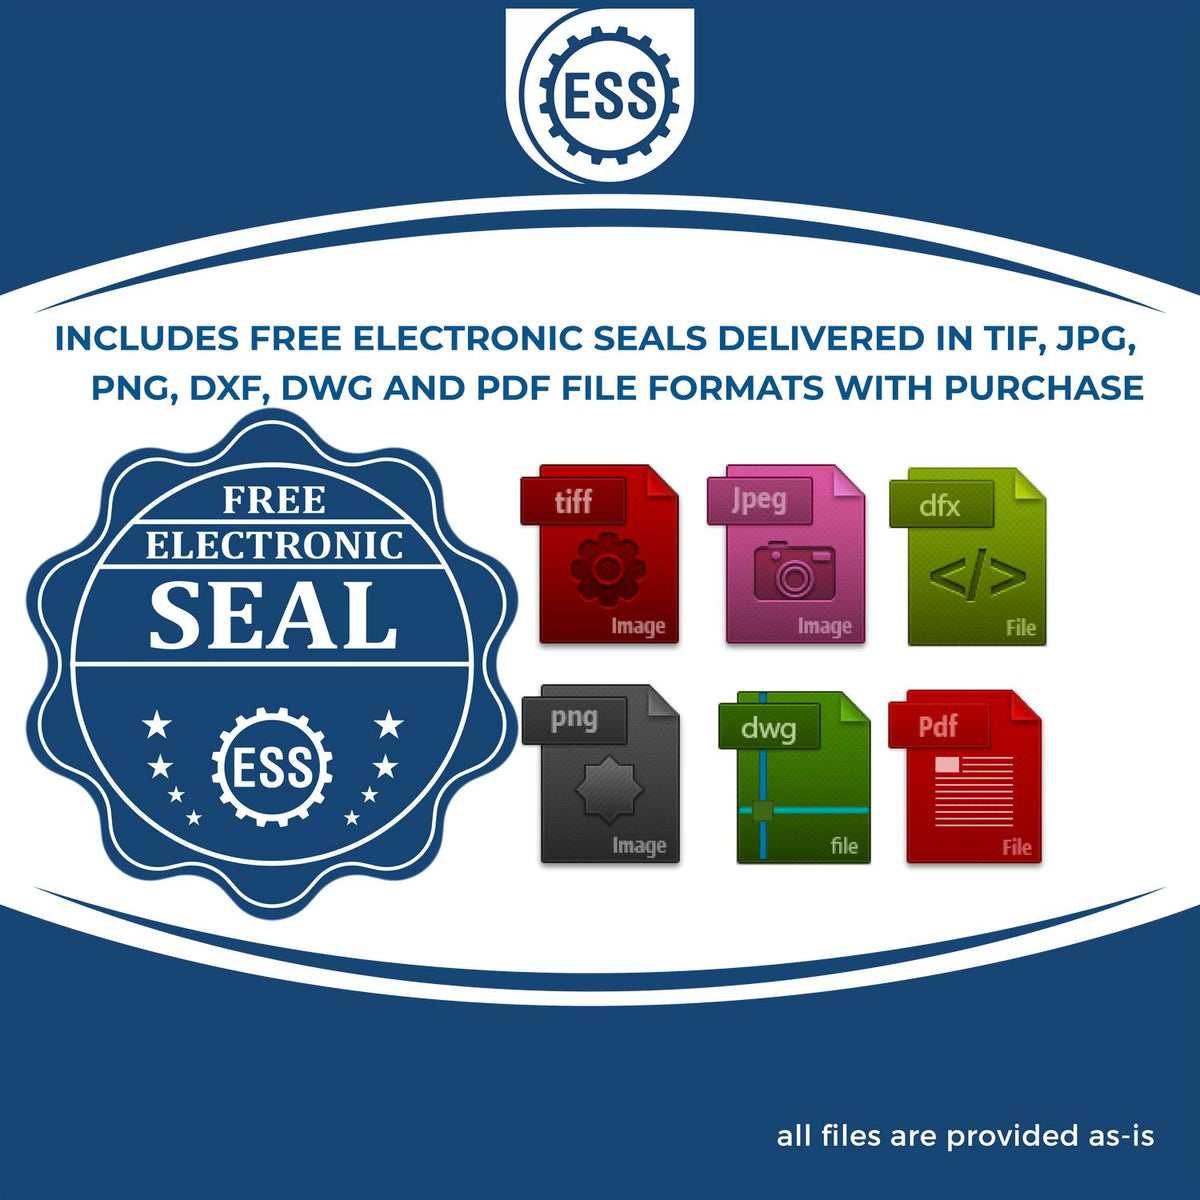 An infographic for the free electronic seal for the Wooden Handle Delaware State Seal Notary Public Stamp illustrating the different file type icons such as DXF, DWG, TIF, JPG and PNG.